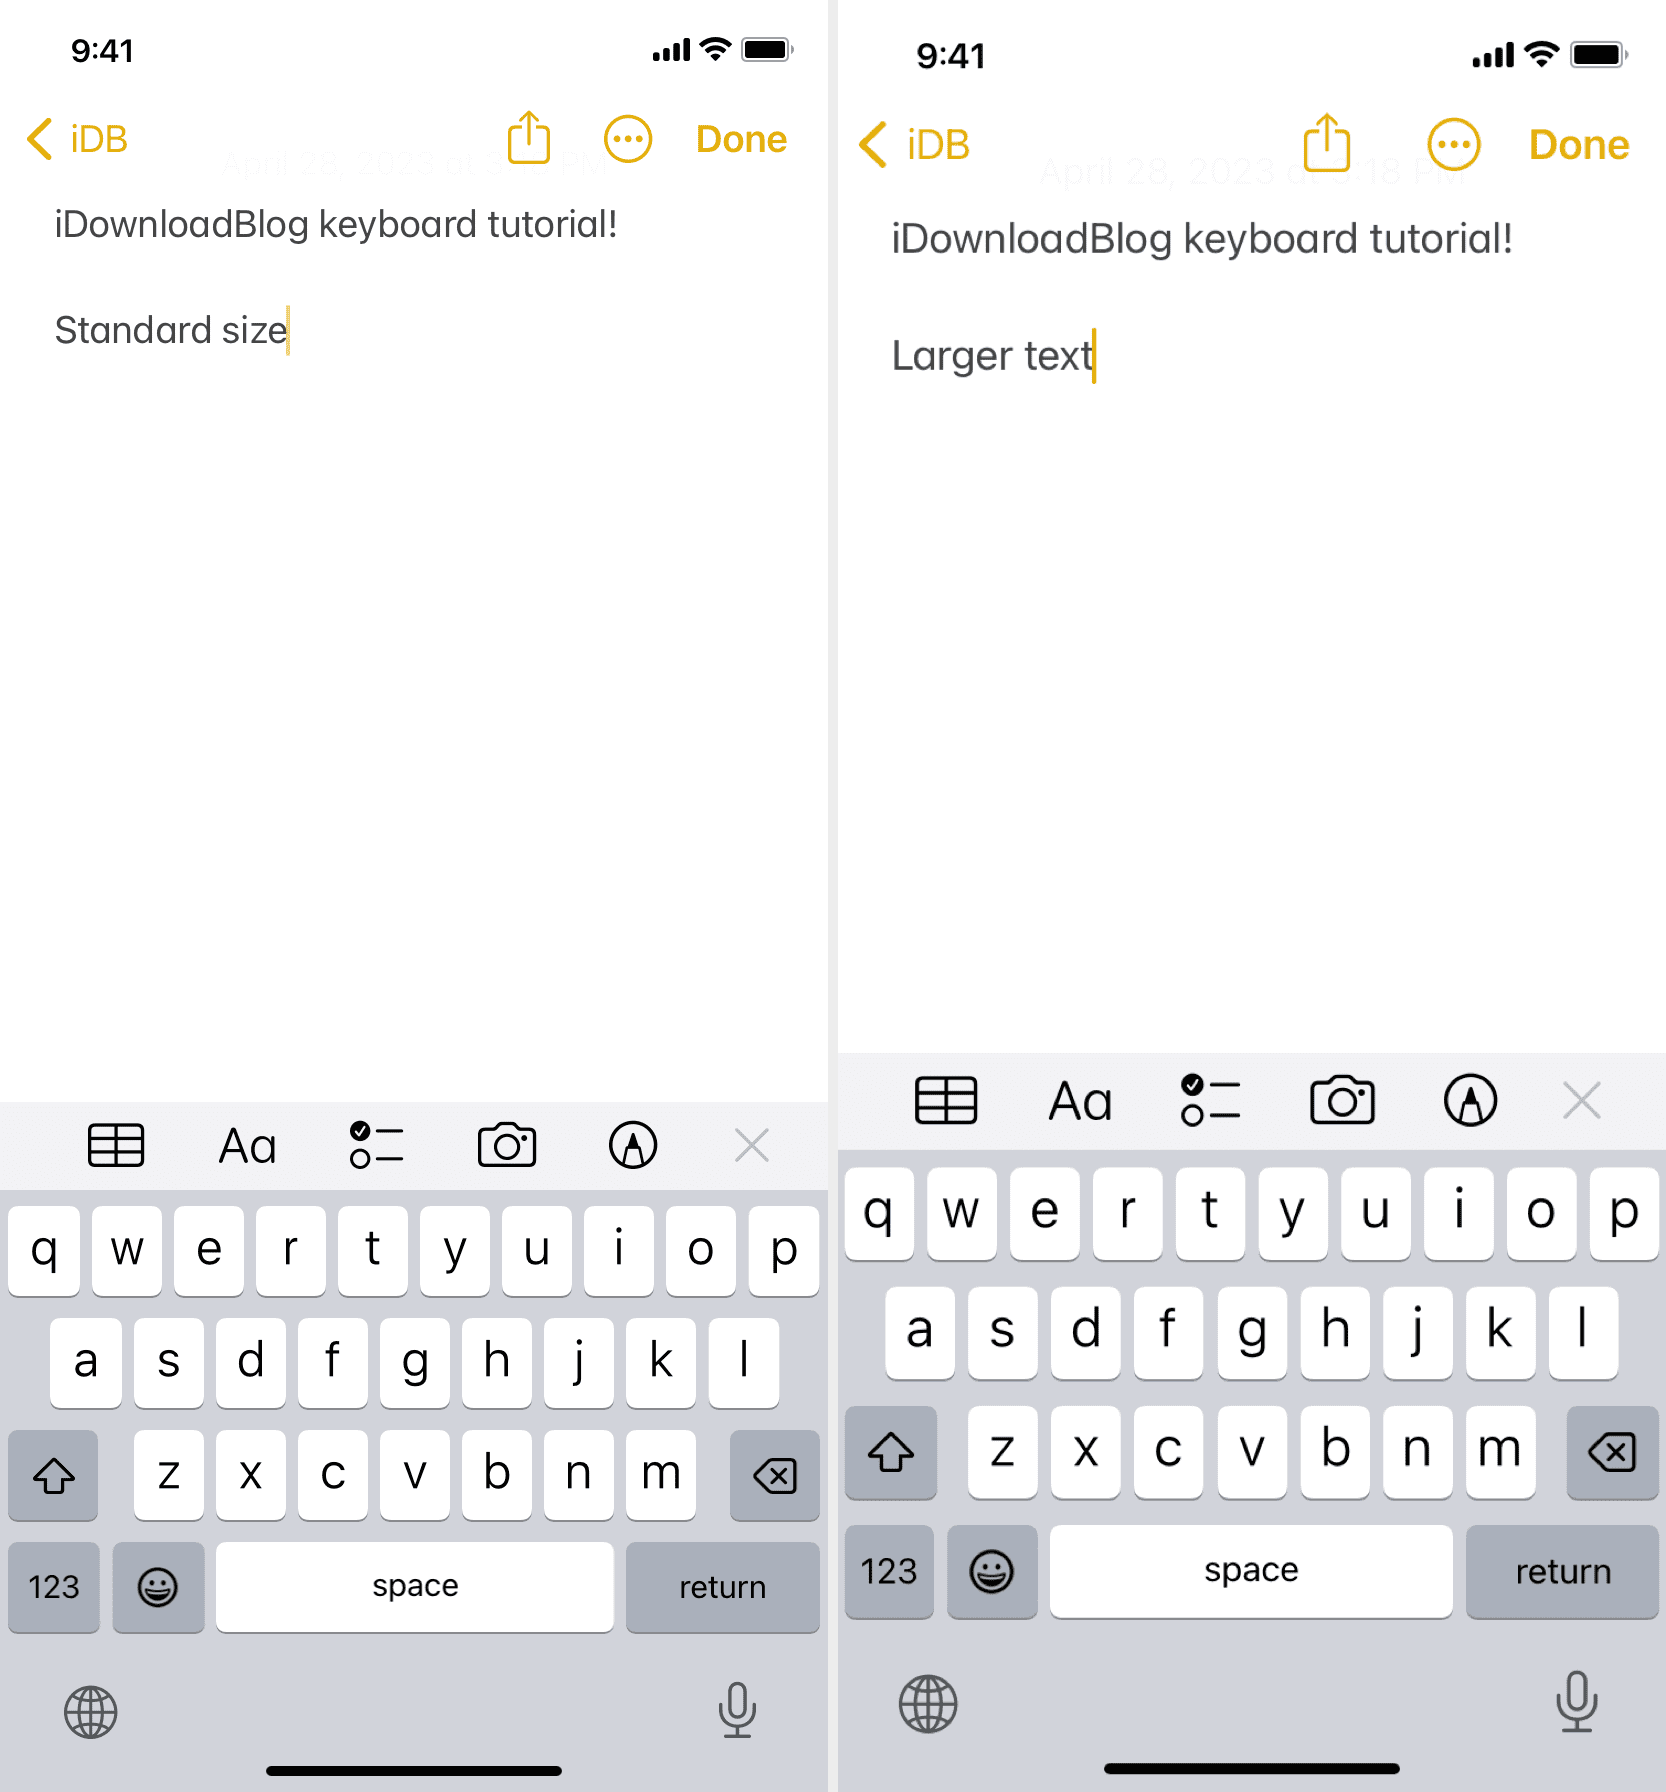 Standard and Larger text keyboards on iPhone